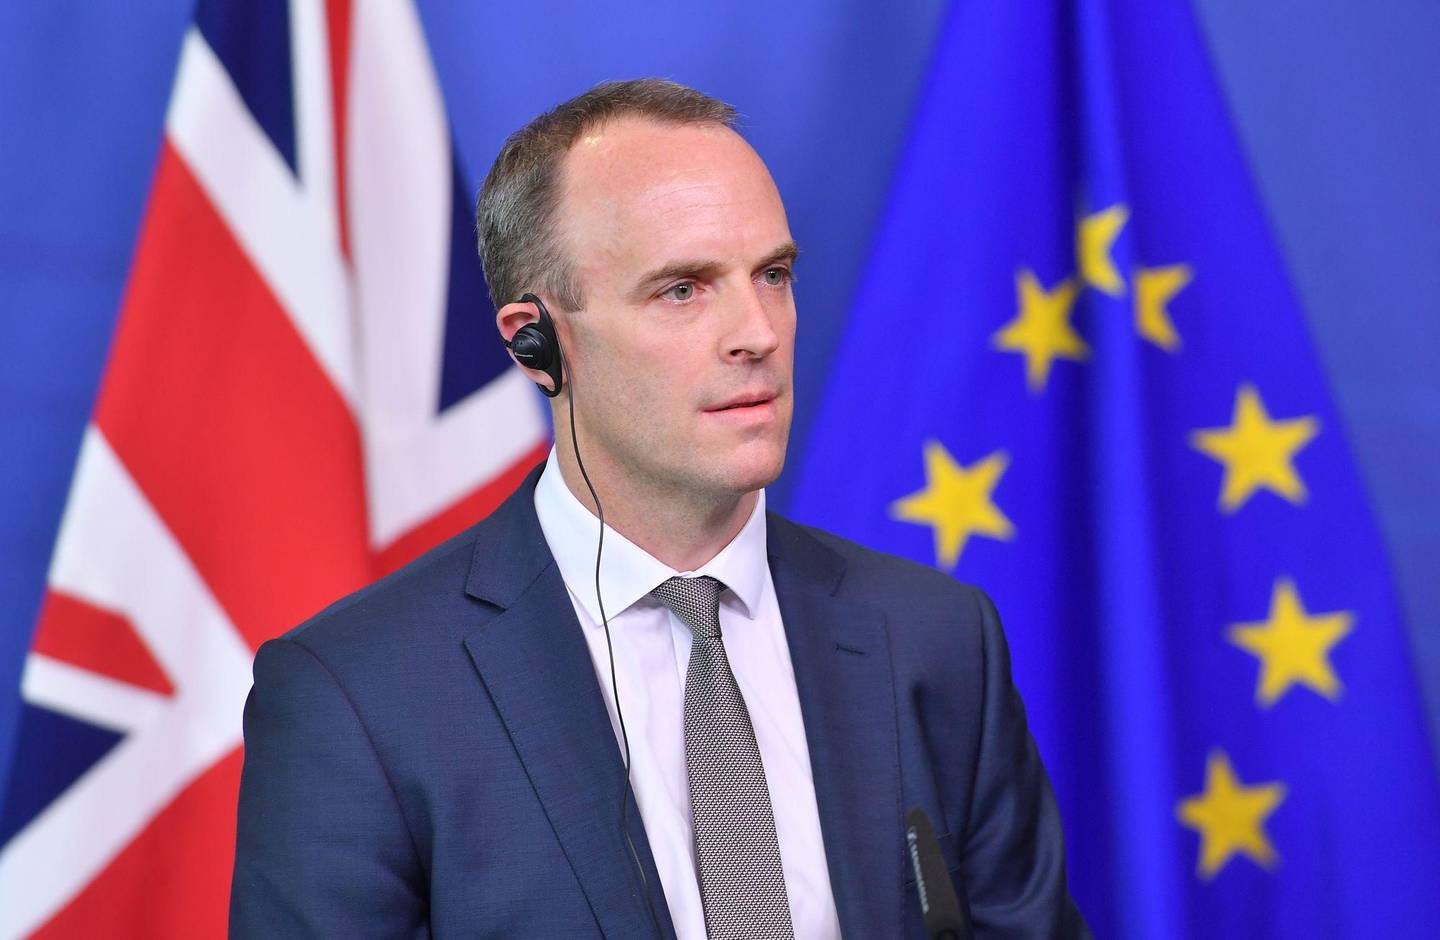 (FILES) In this file photo taken on August 31, 2018 Britain's Brexit Secretary Dominic Raab gives a joint press conference with EU Chief Brexit Negotiator at the European Commission in Brussels. - British Prime Minister Theresa May suffered a huge blow on November 15, 2018 as Dominic Raab quit as her Brexit secretary, saying he "must resign" over the proposed EU withdrawal agreement. (Photo by Emmanuel DUNAND / AFP)